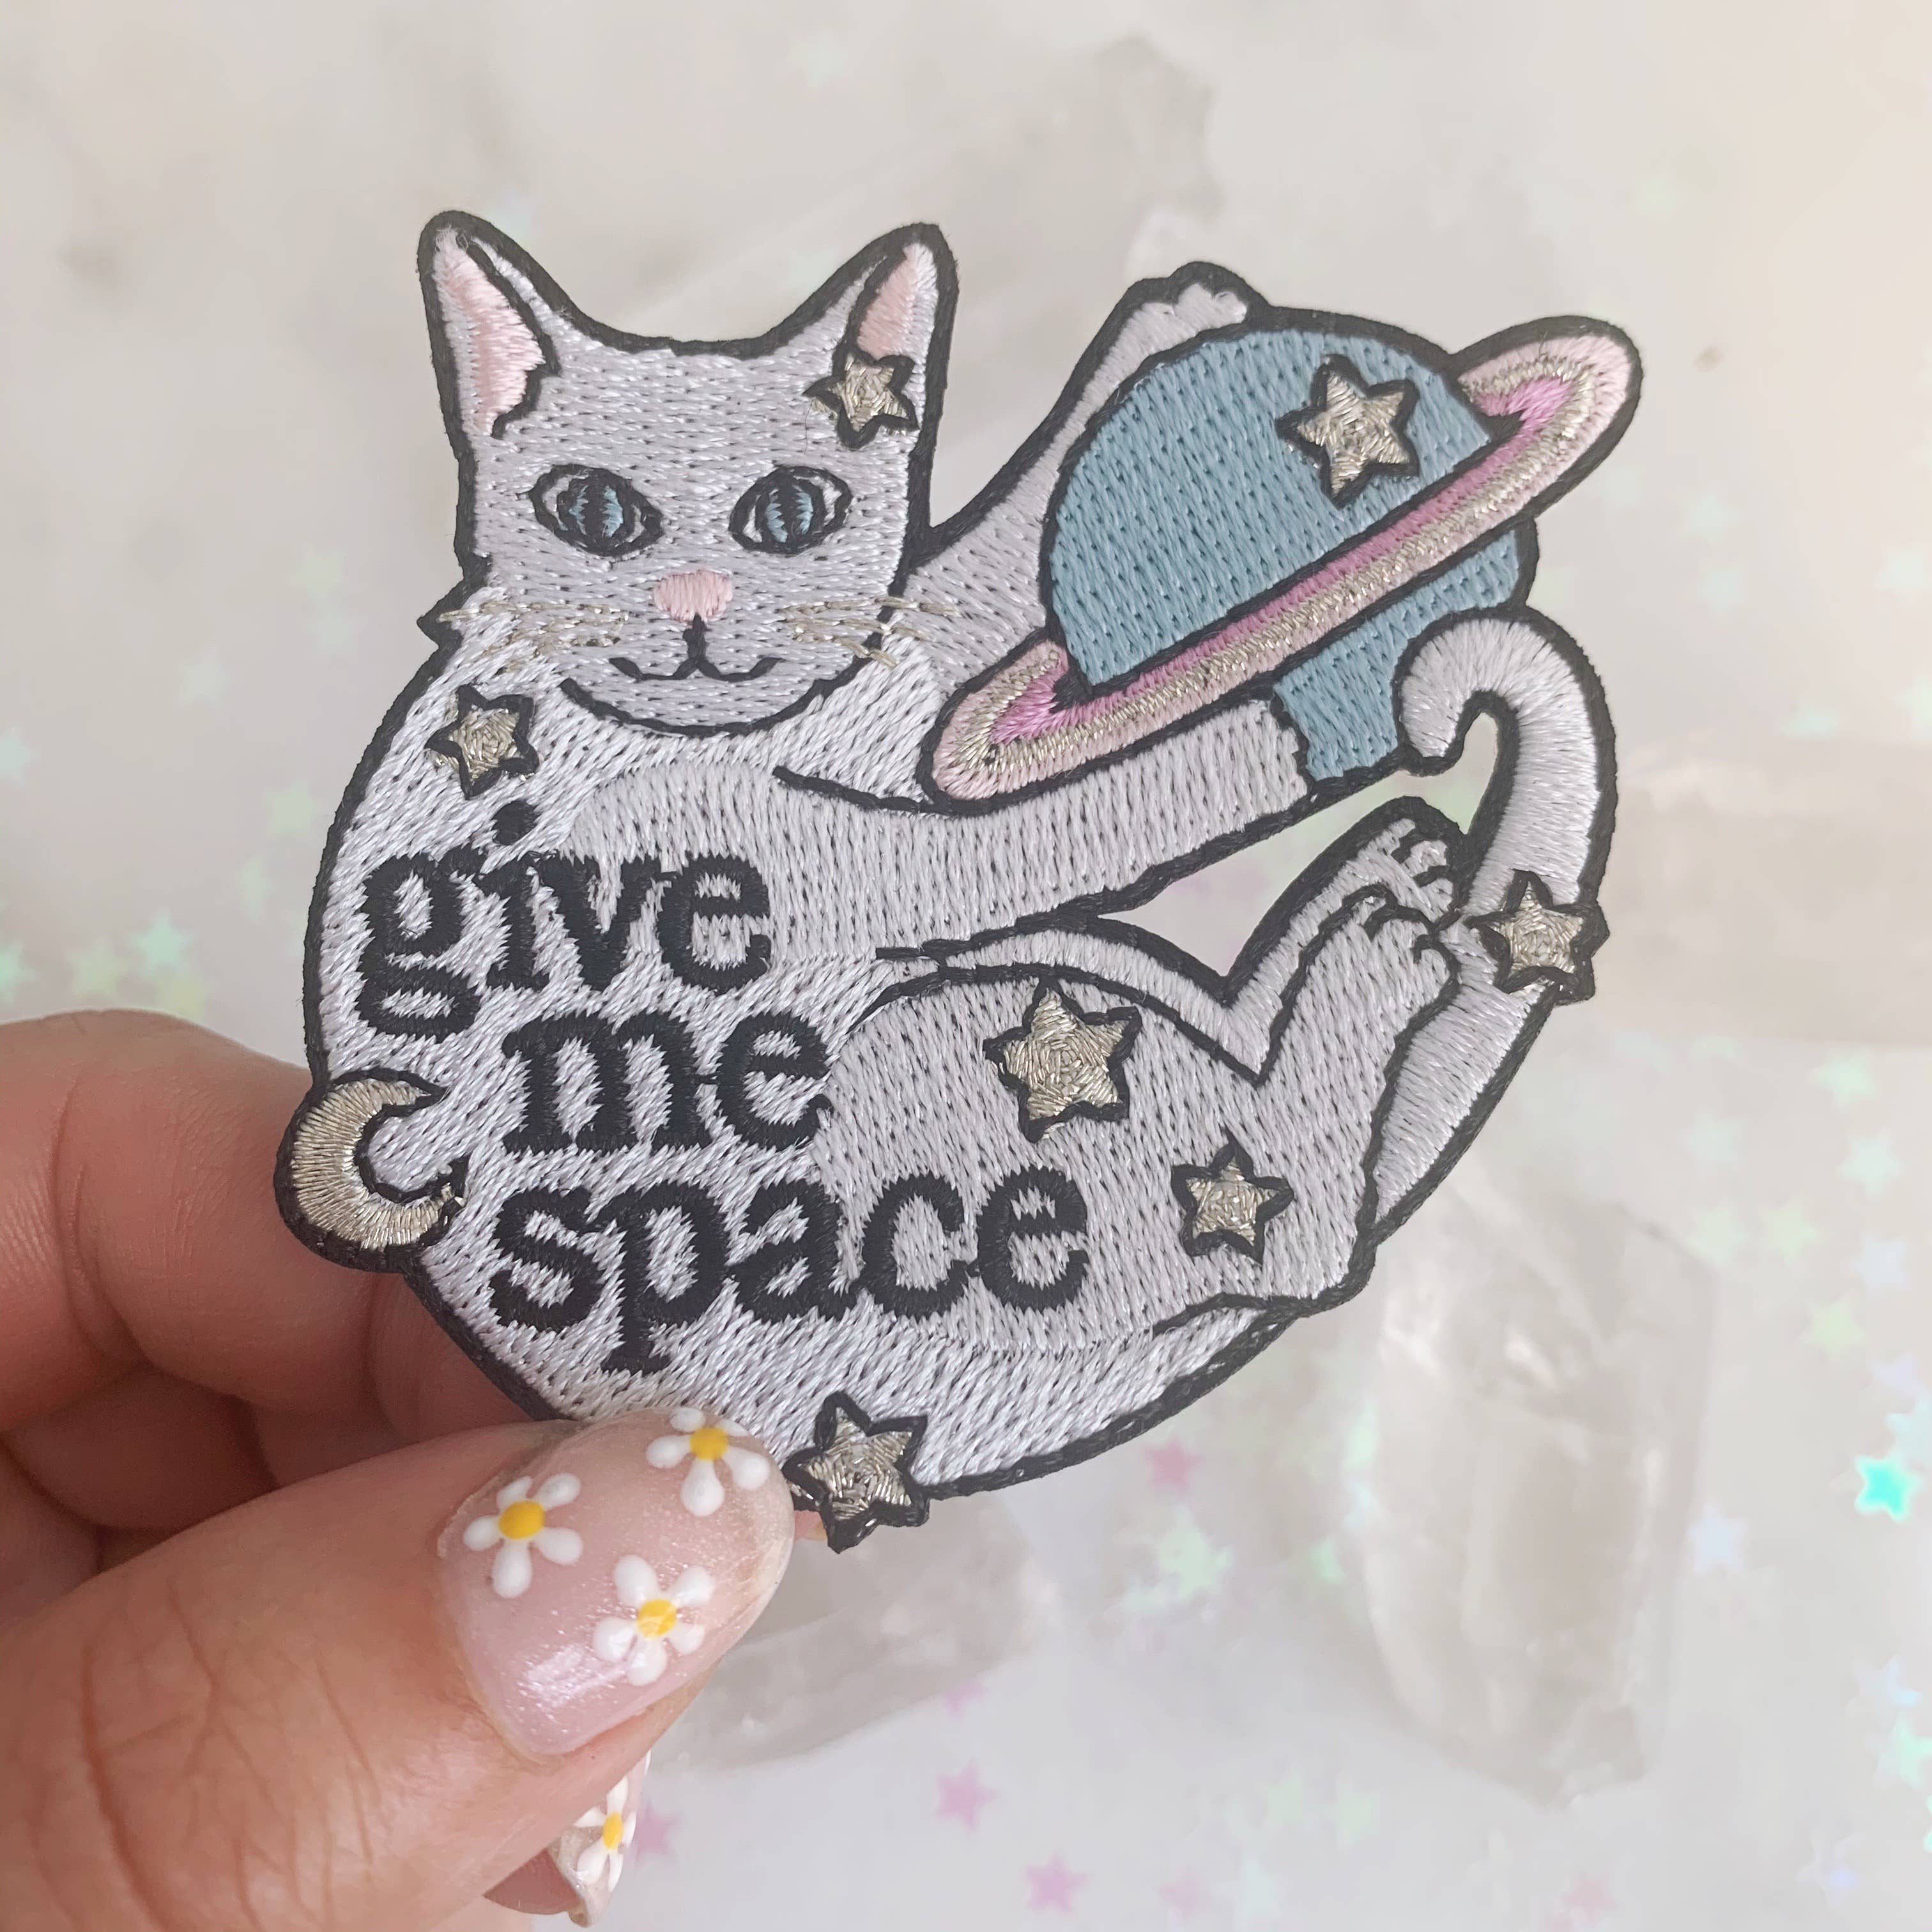 Give Me Space Cat Patch